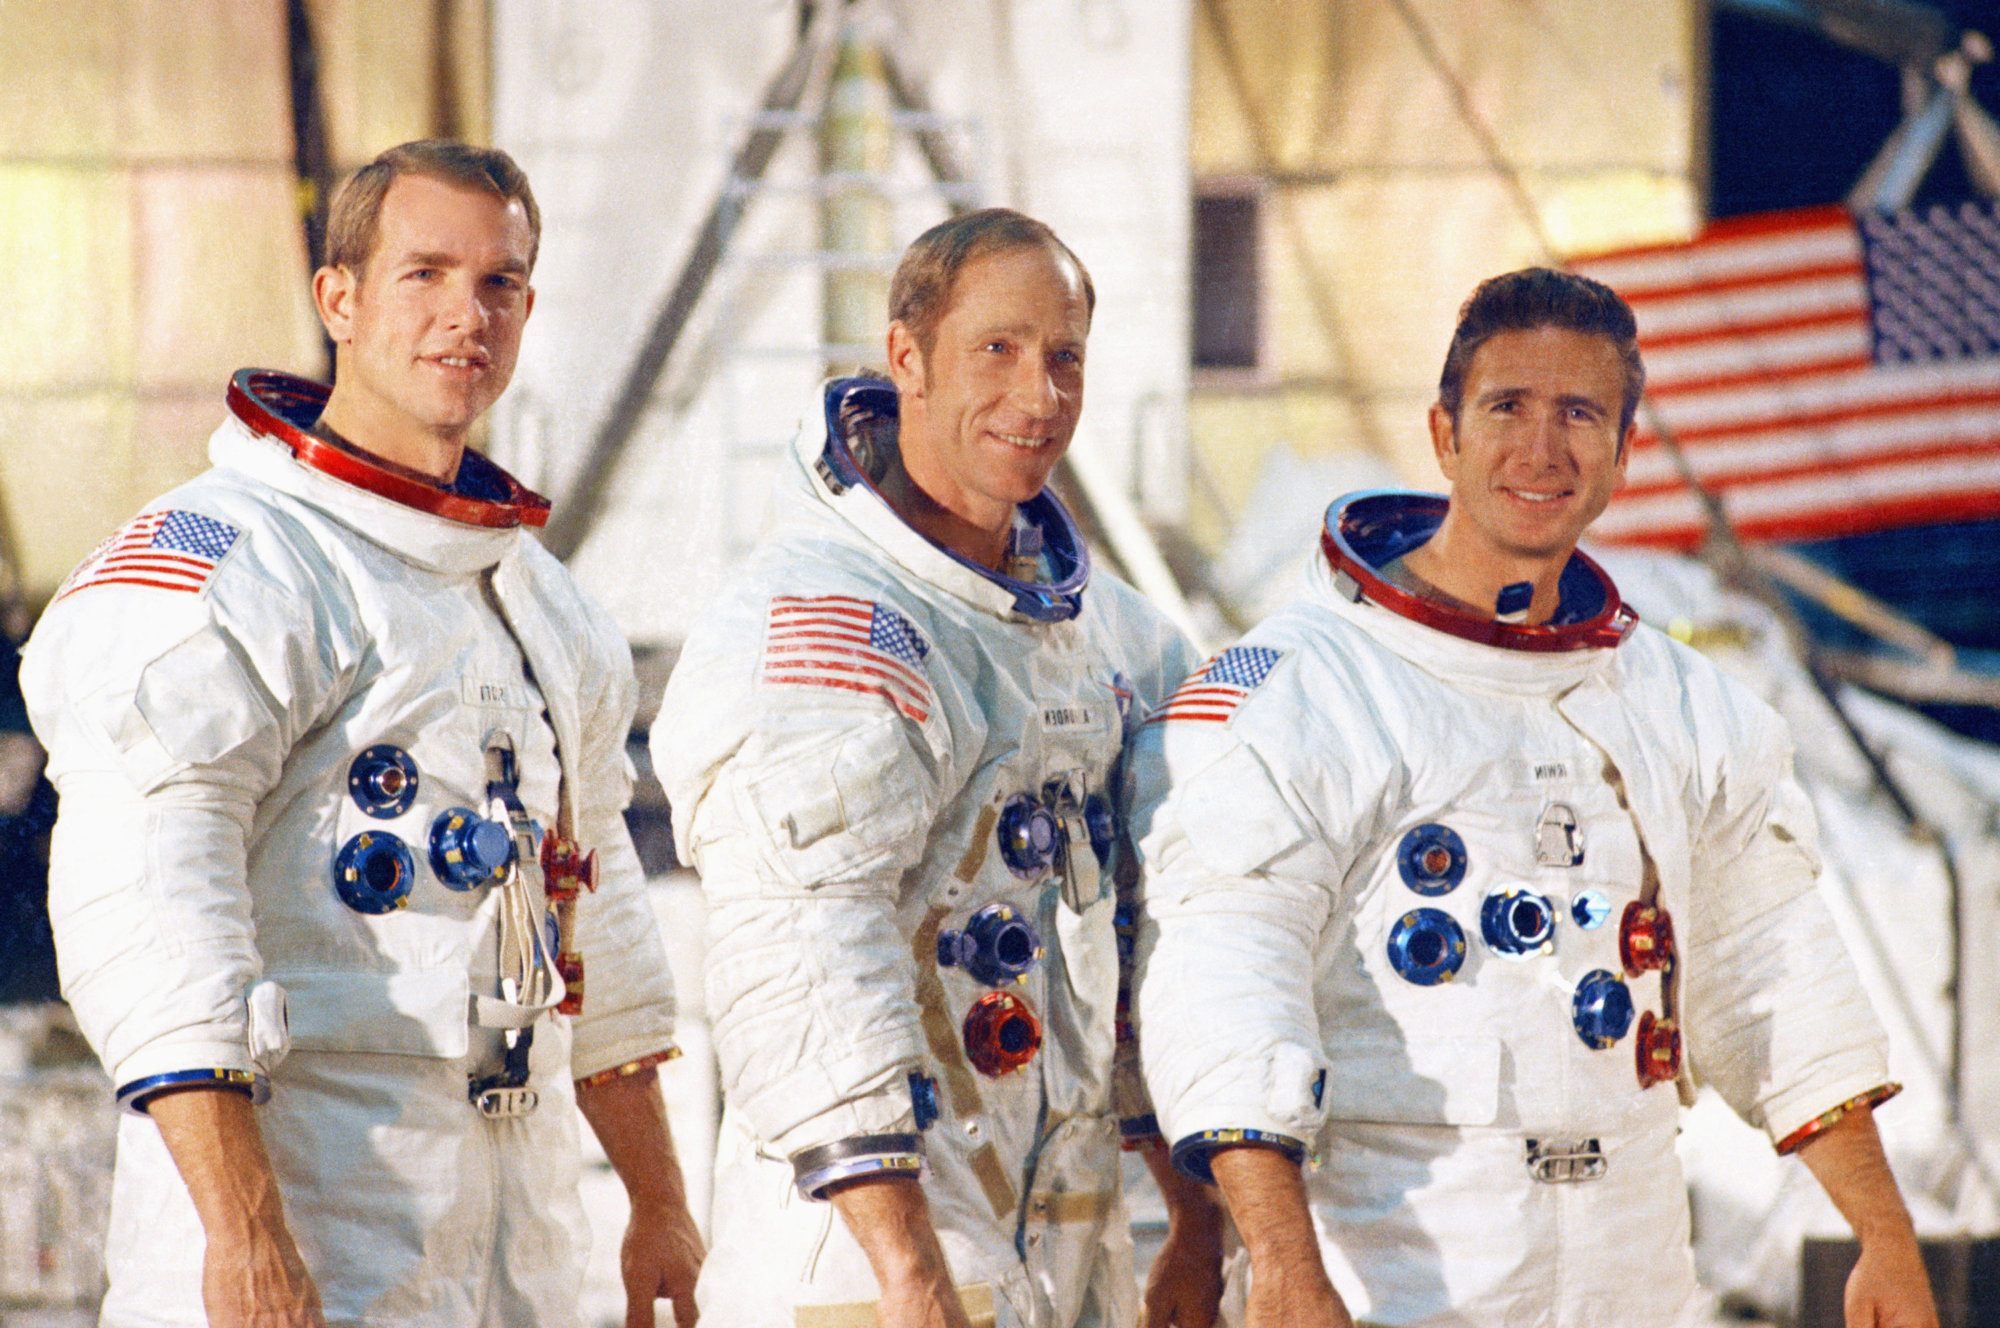 Apollo 15 commander David R. Scott, Command Module pilot Alfred M. Worden, and Lunar Module pilot James B. Irwin, enroute to spacecraft for countdown demonstration test in Cape Kennedy, Florida, July 14, 1971. (AP Photo/Jim Kerlin)